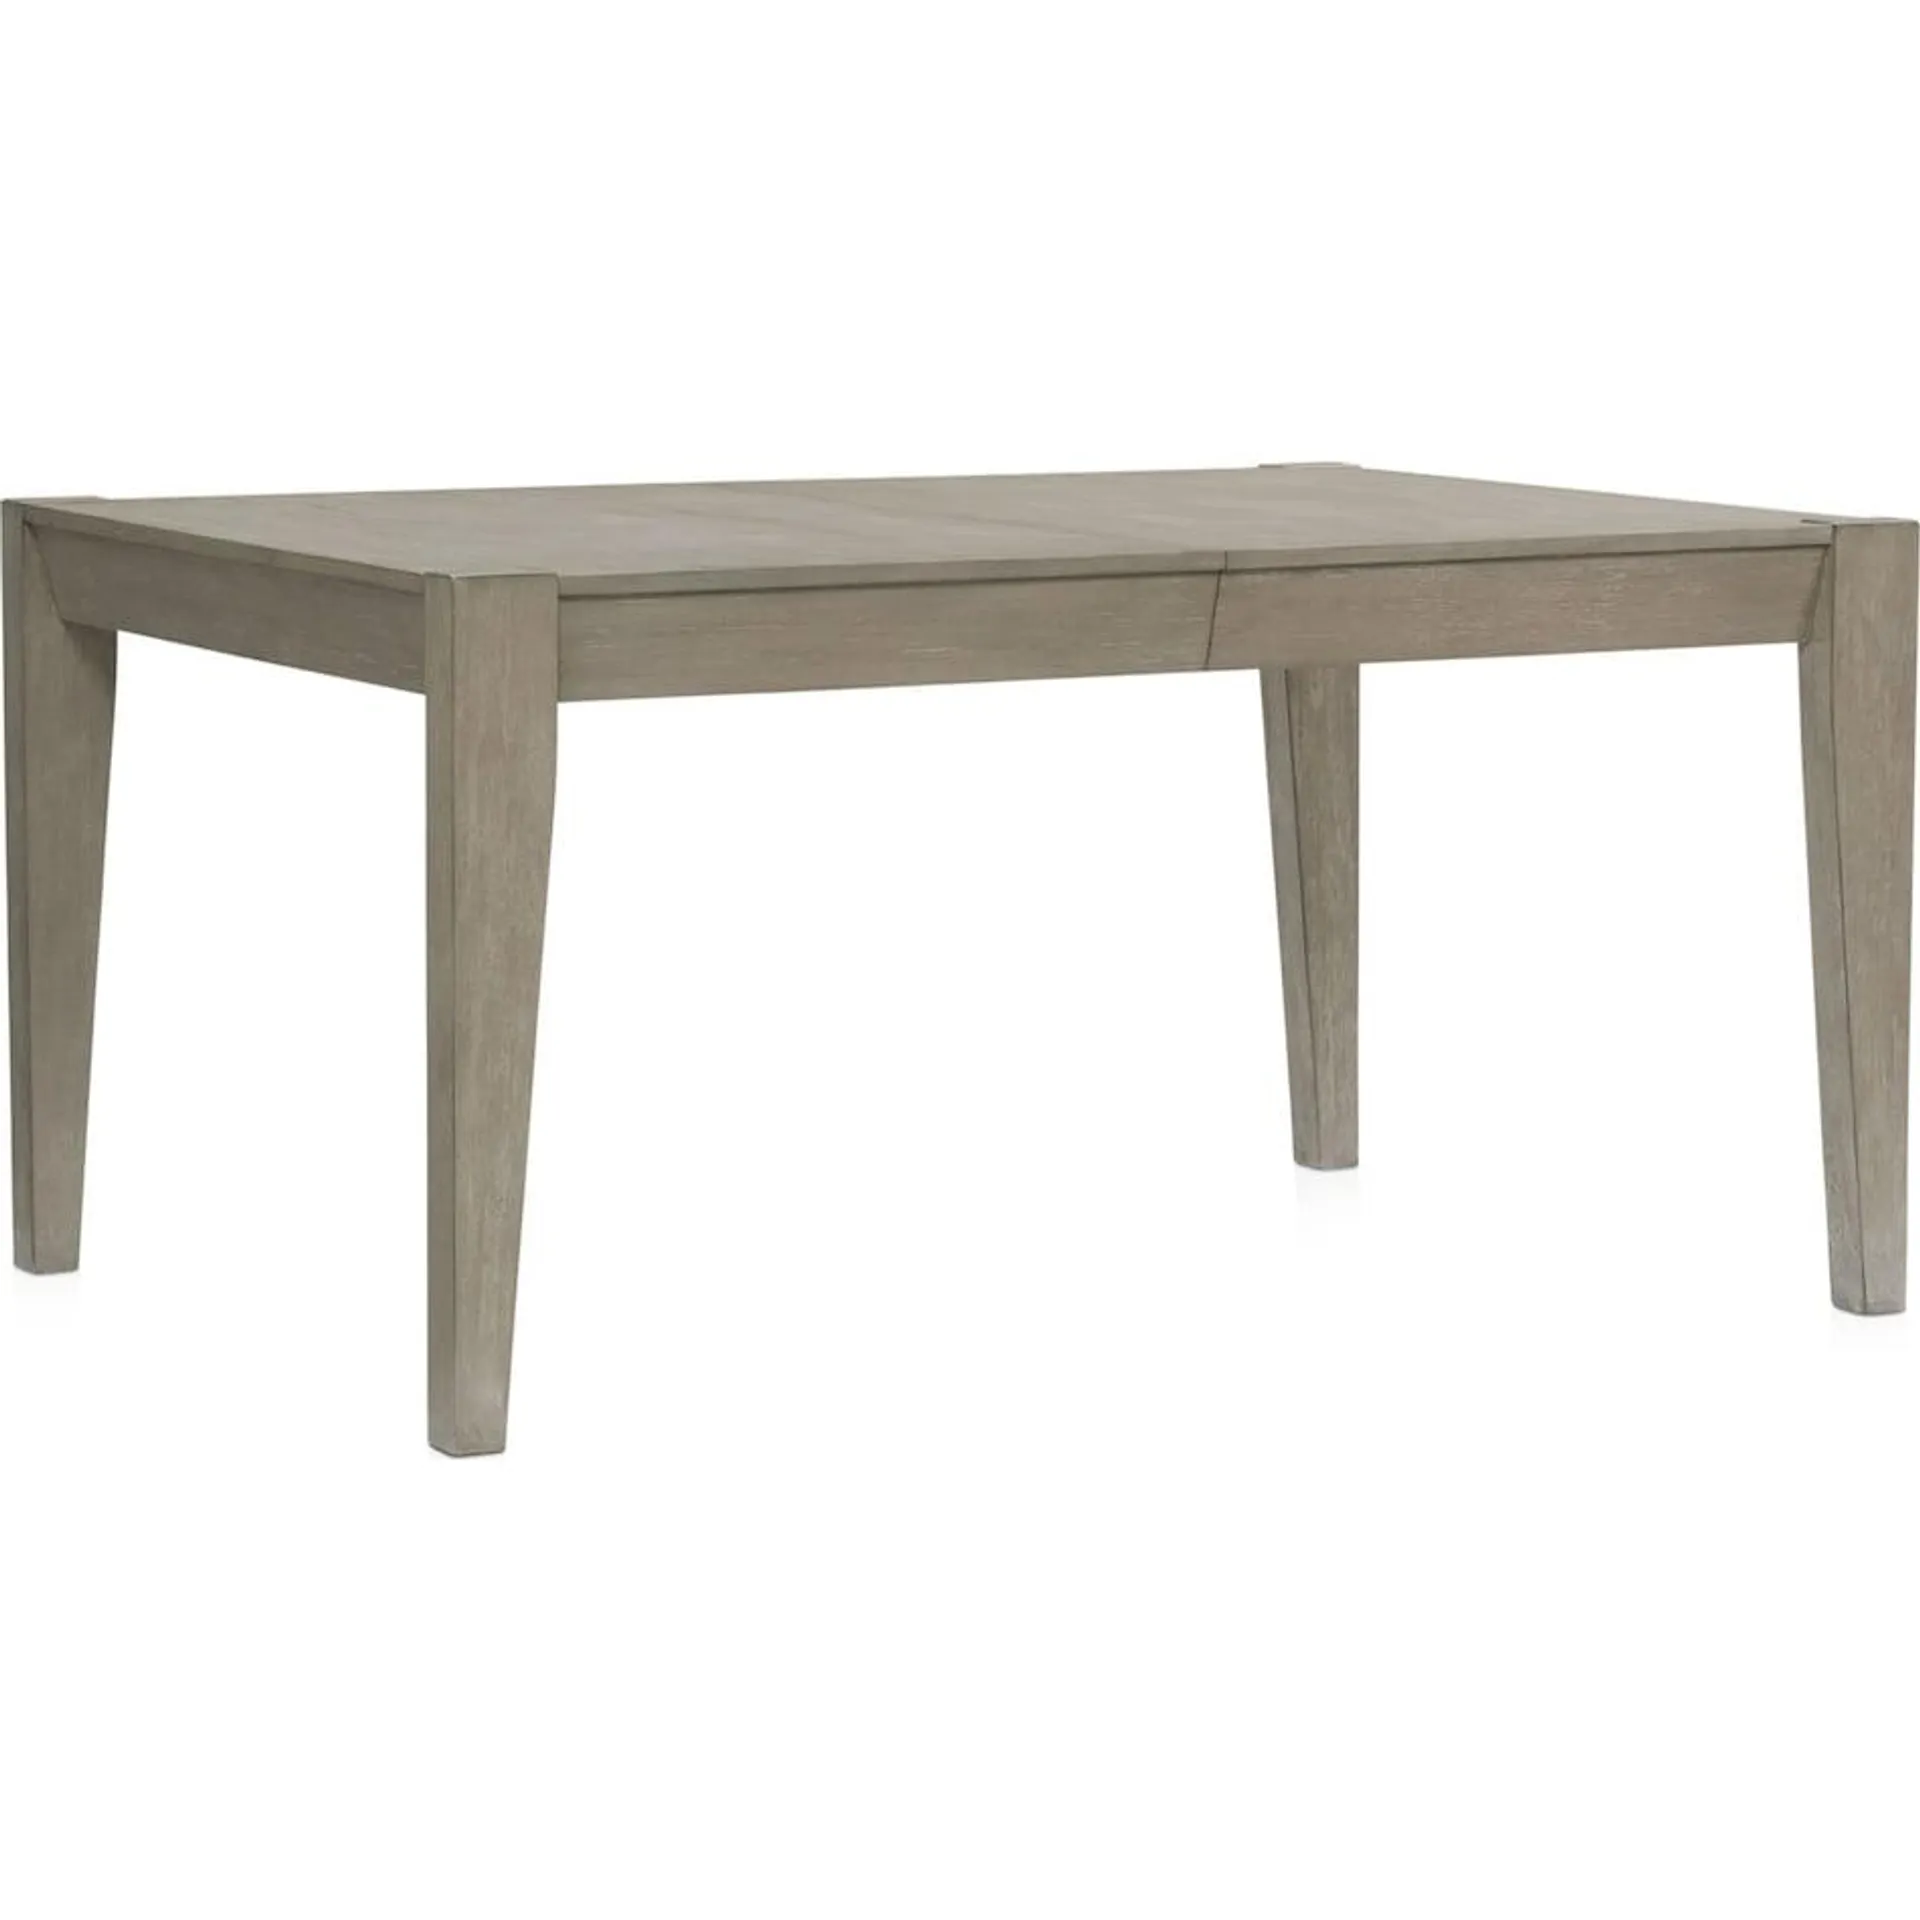 Bowen Dining Table